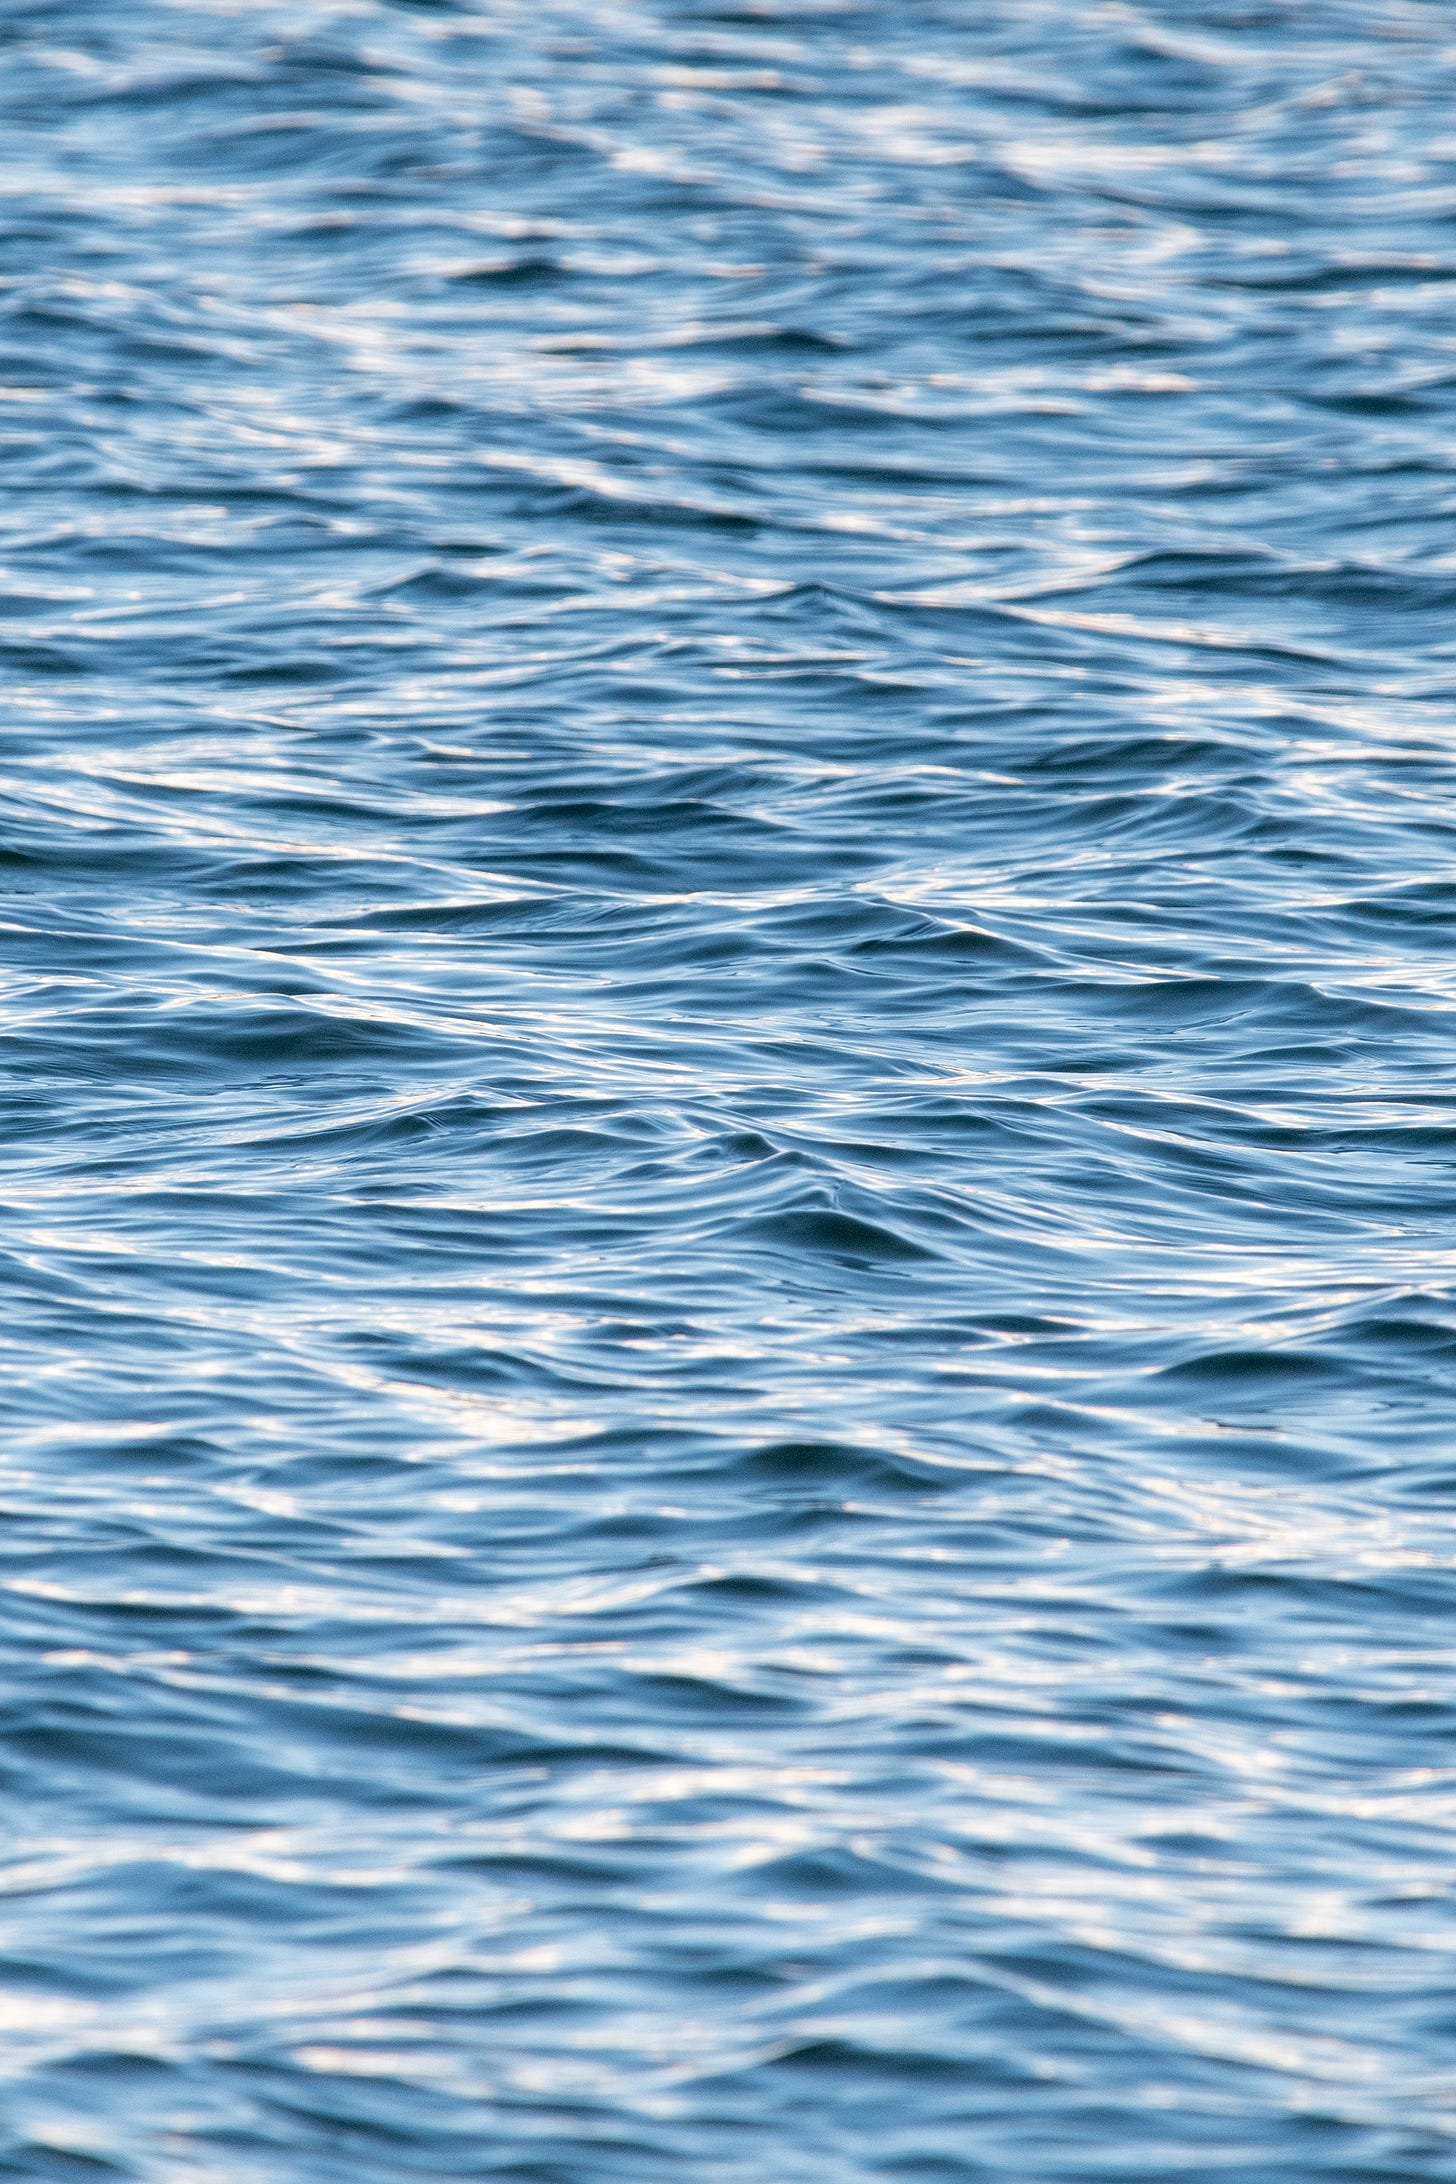 A photograph of a tranche of ocean water, slate blue with finicky, angular ripples